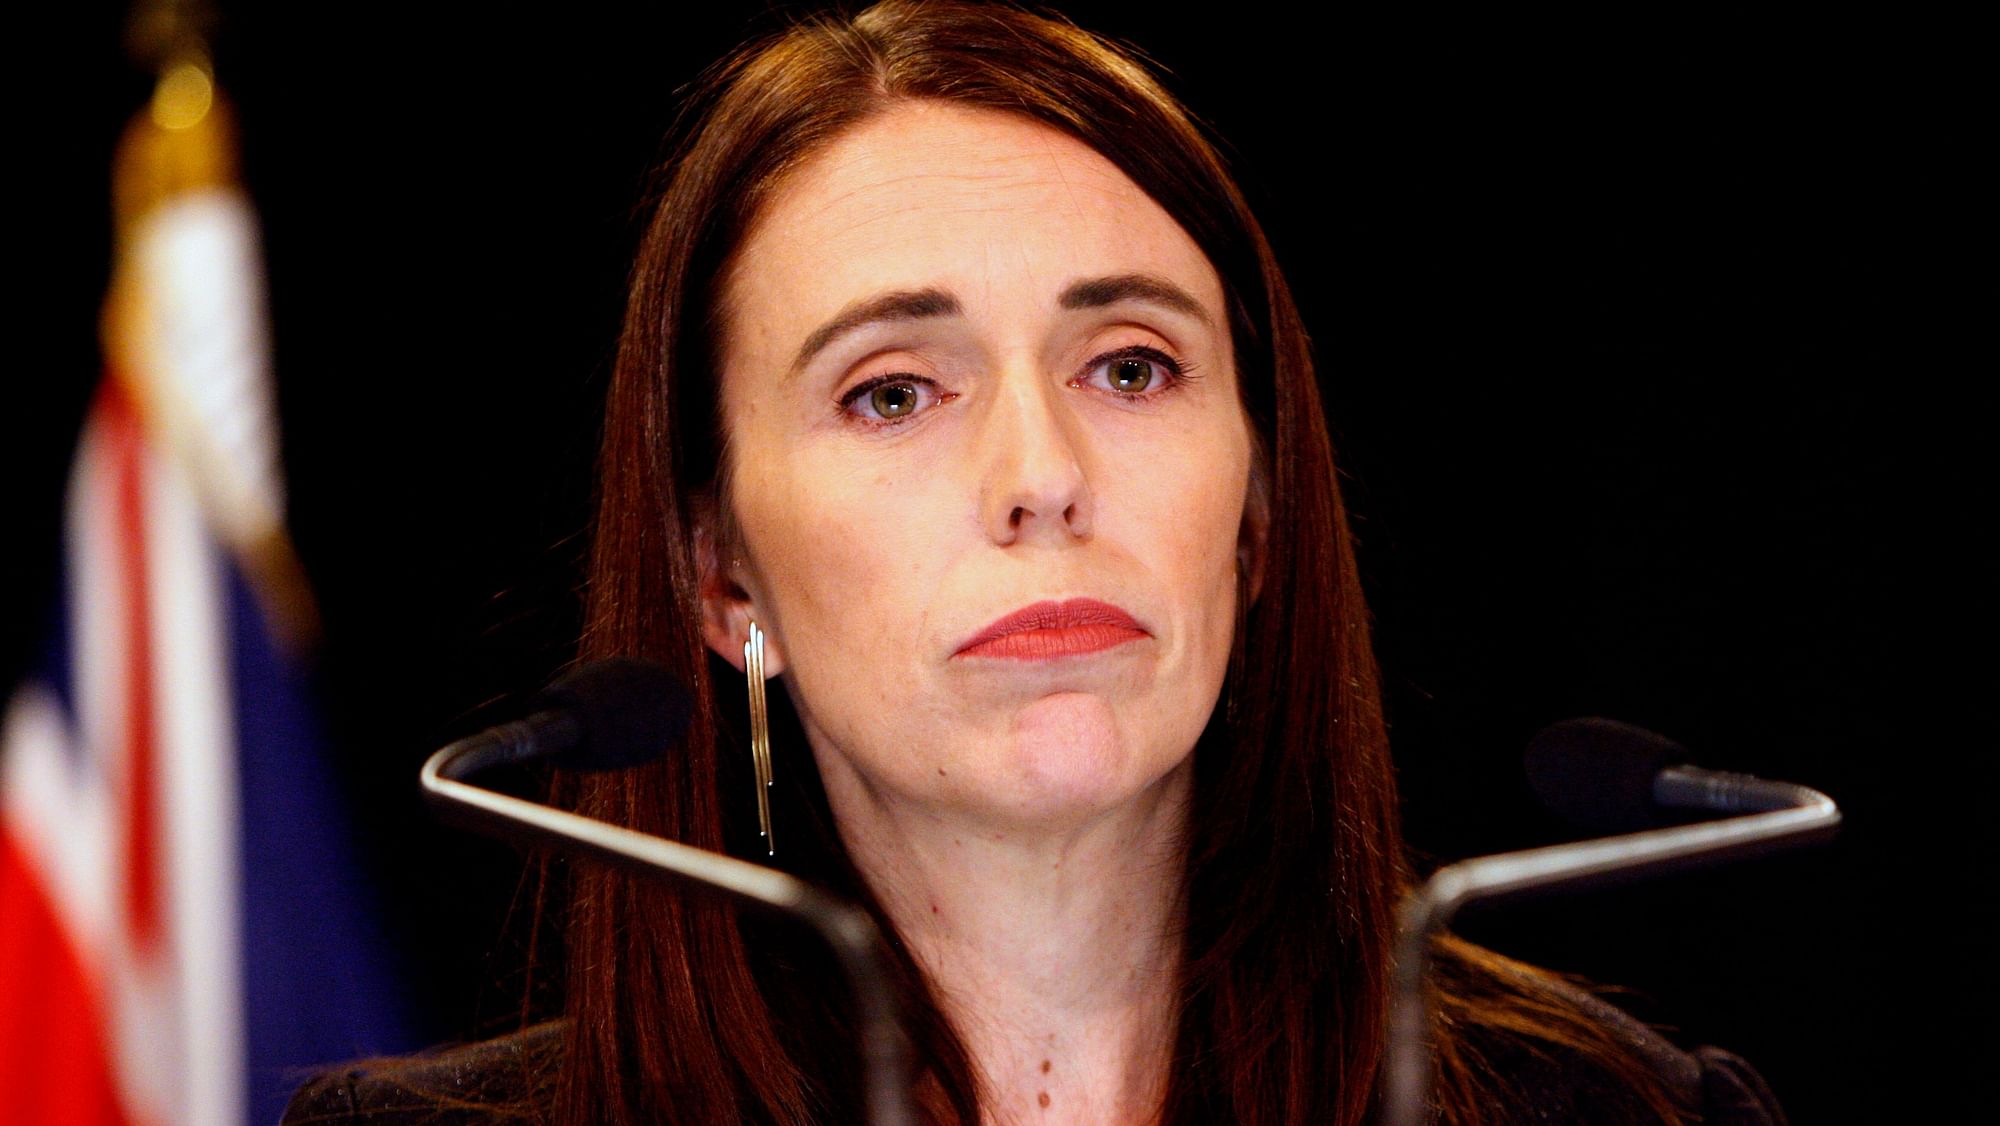 New Zealand Prime Minister Jacinda Ardern addresses a press conference in Wellington, New Zealand Monday, 25 March, 2019.&nbsp;